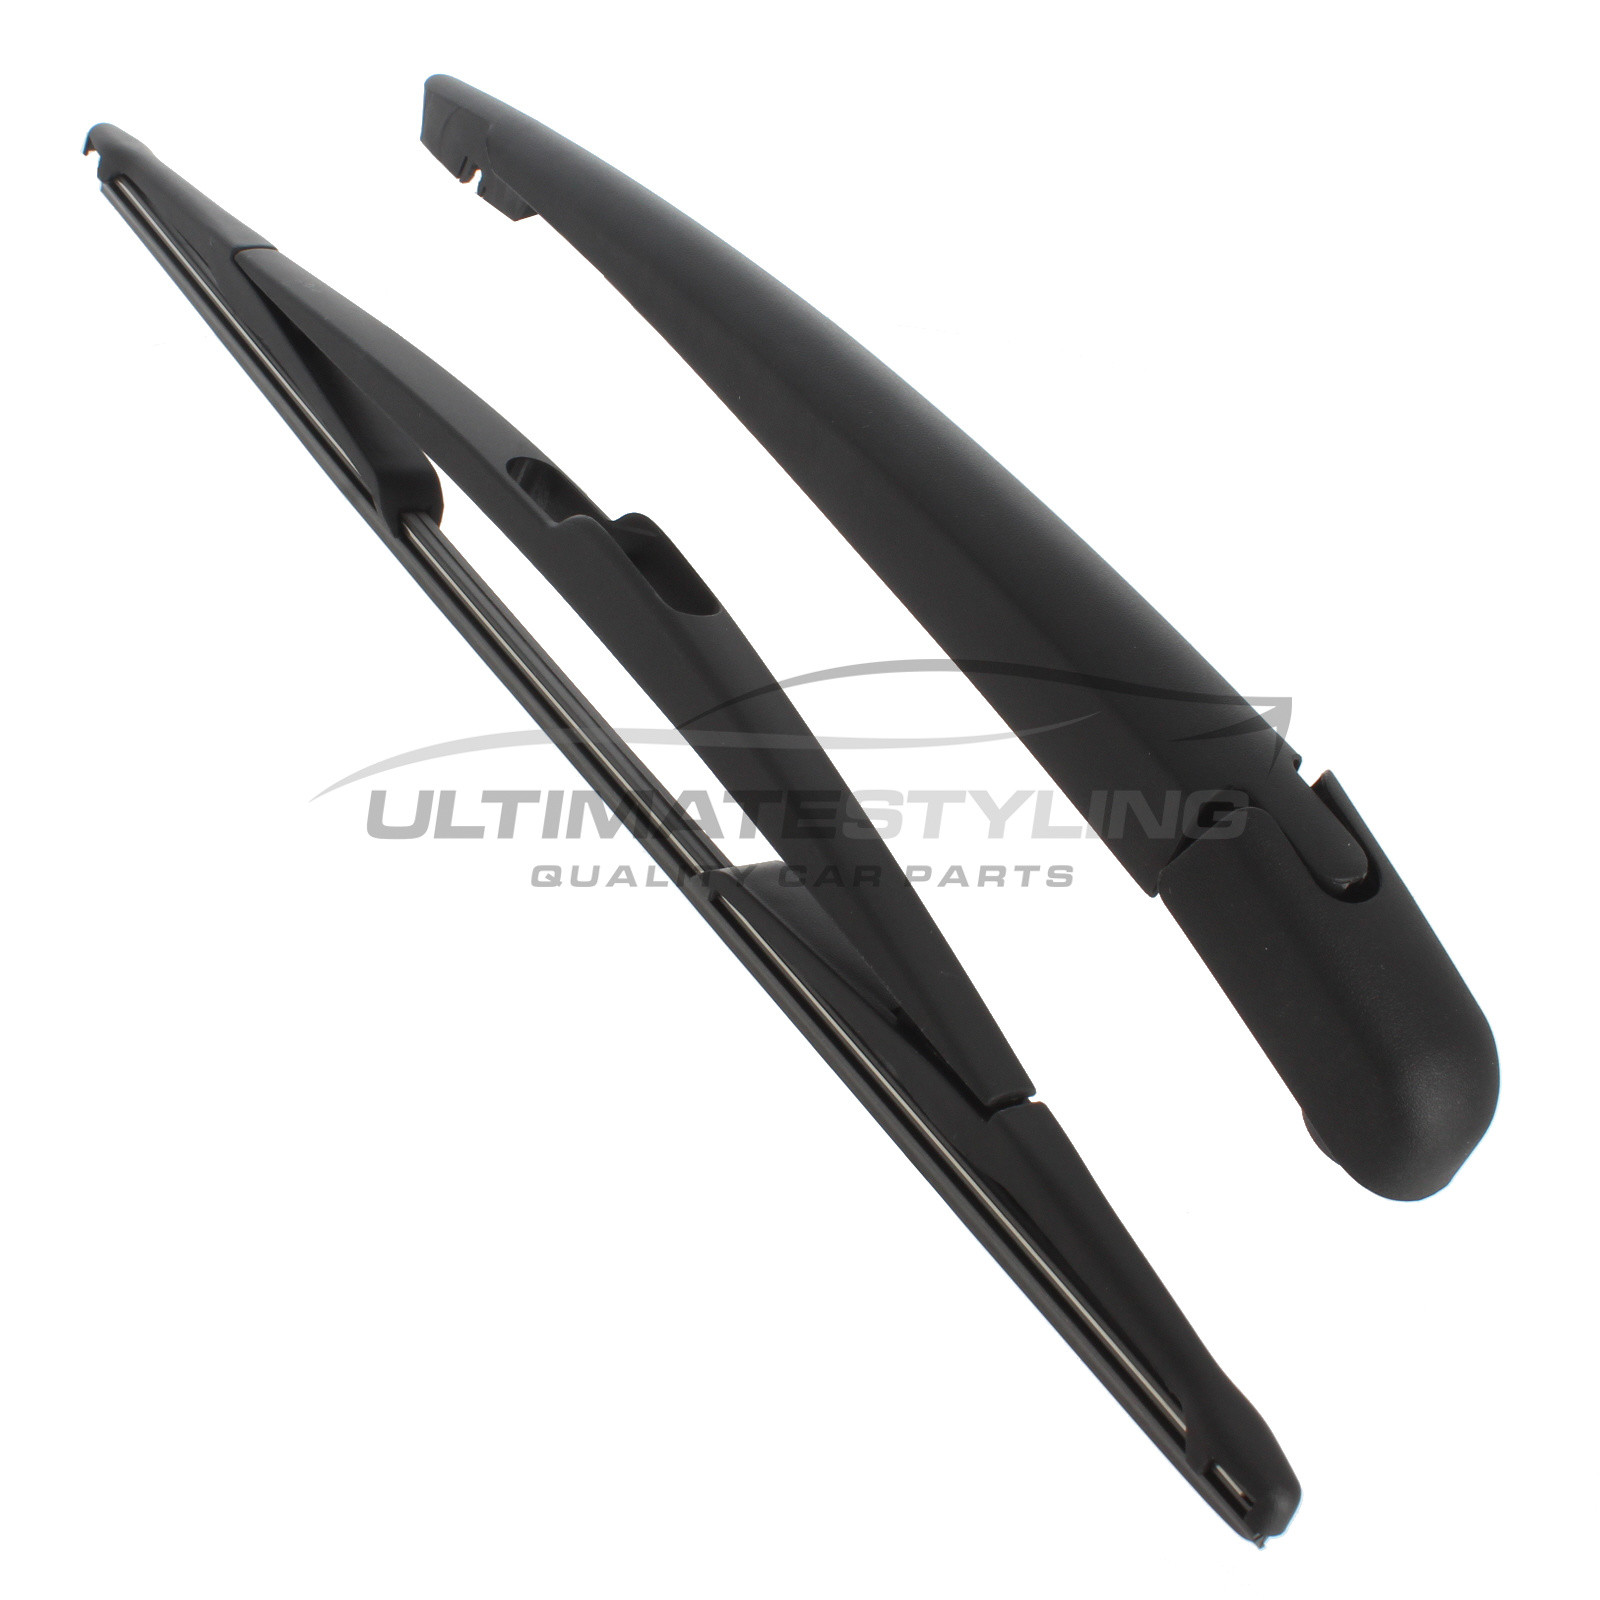 Rear Wiper Arm & Blade Set for Ford C-MAX